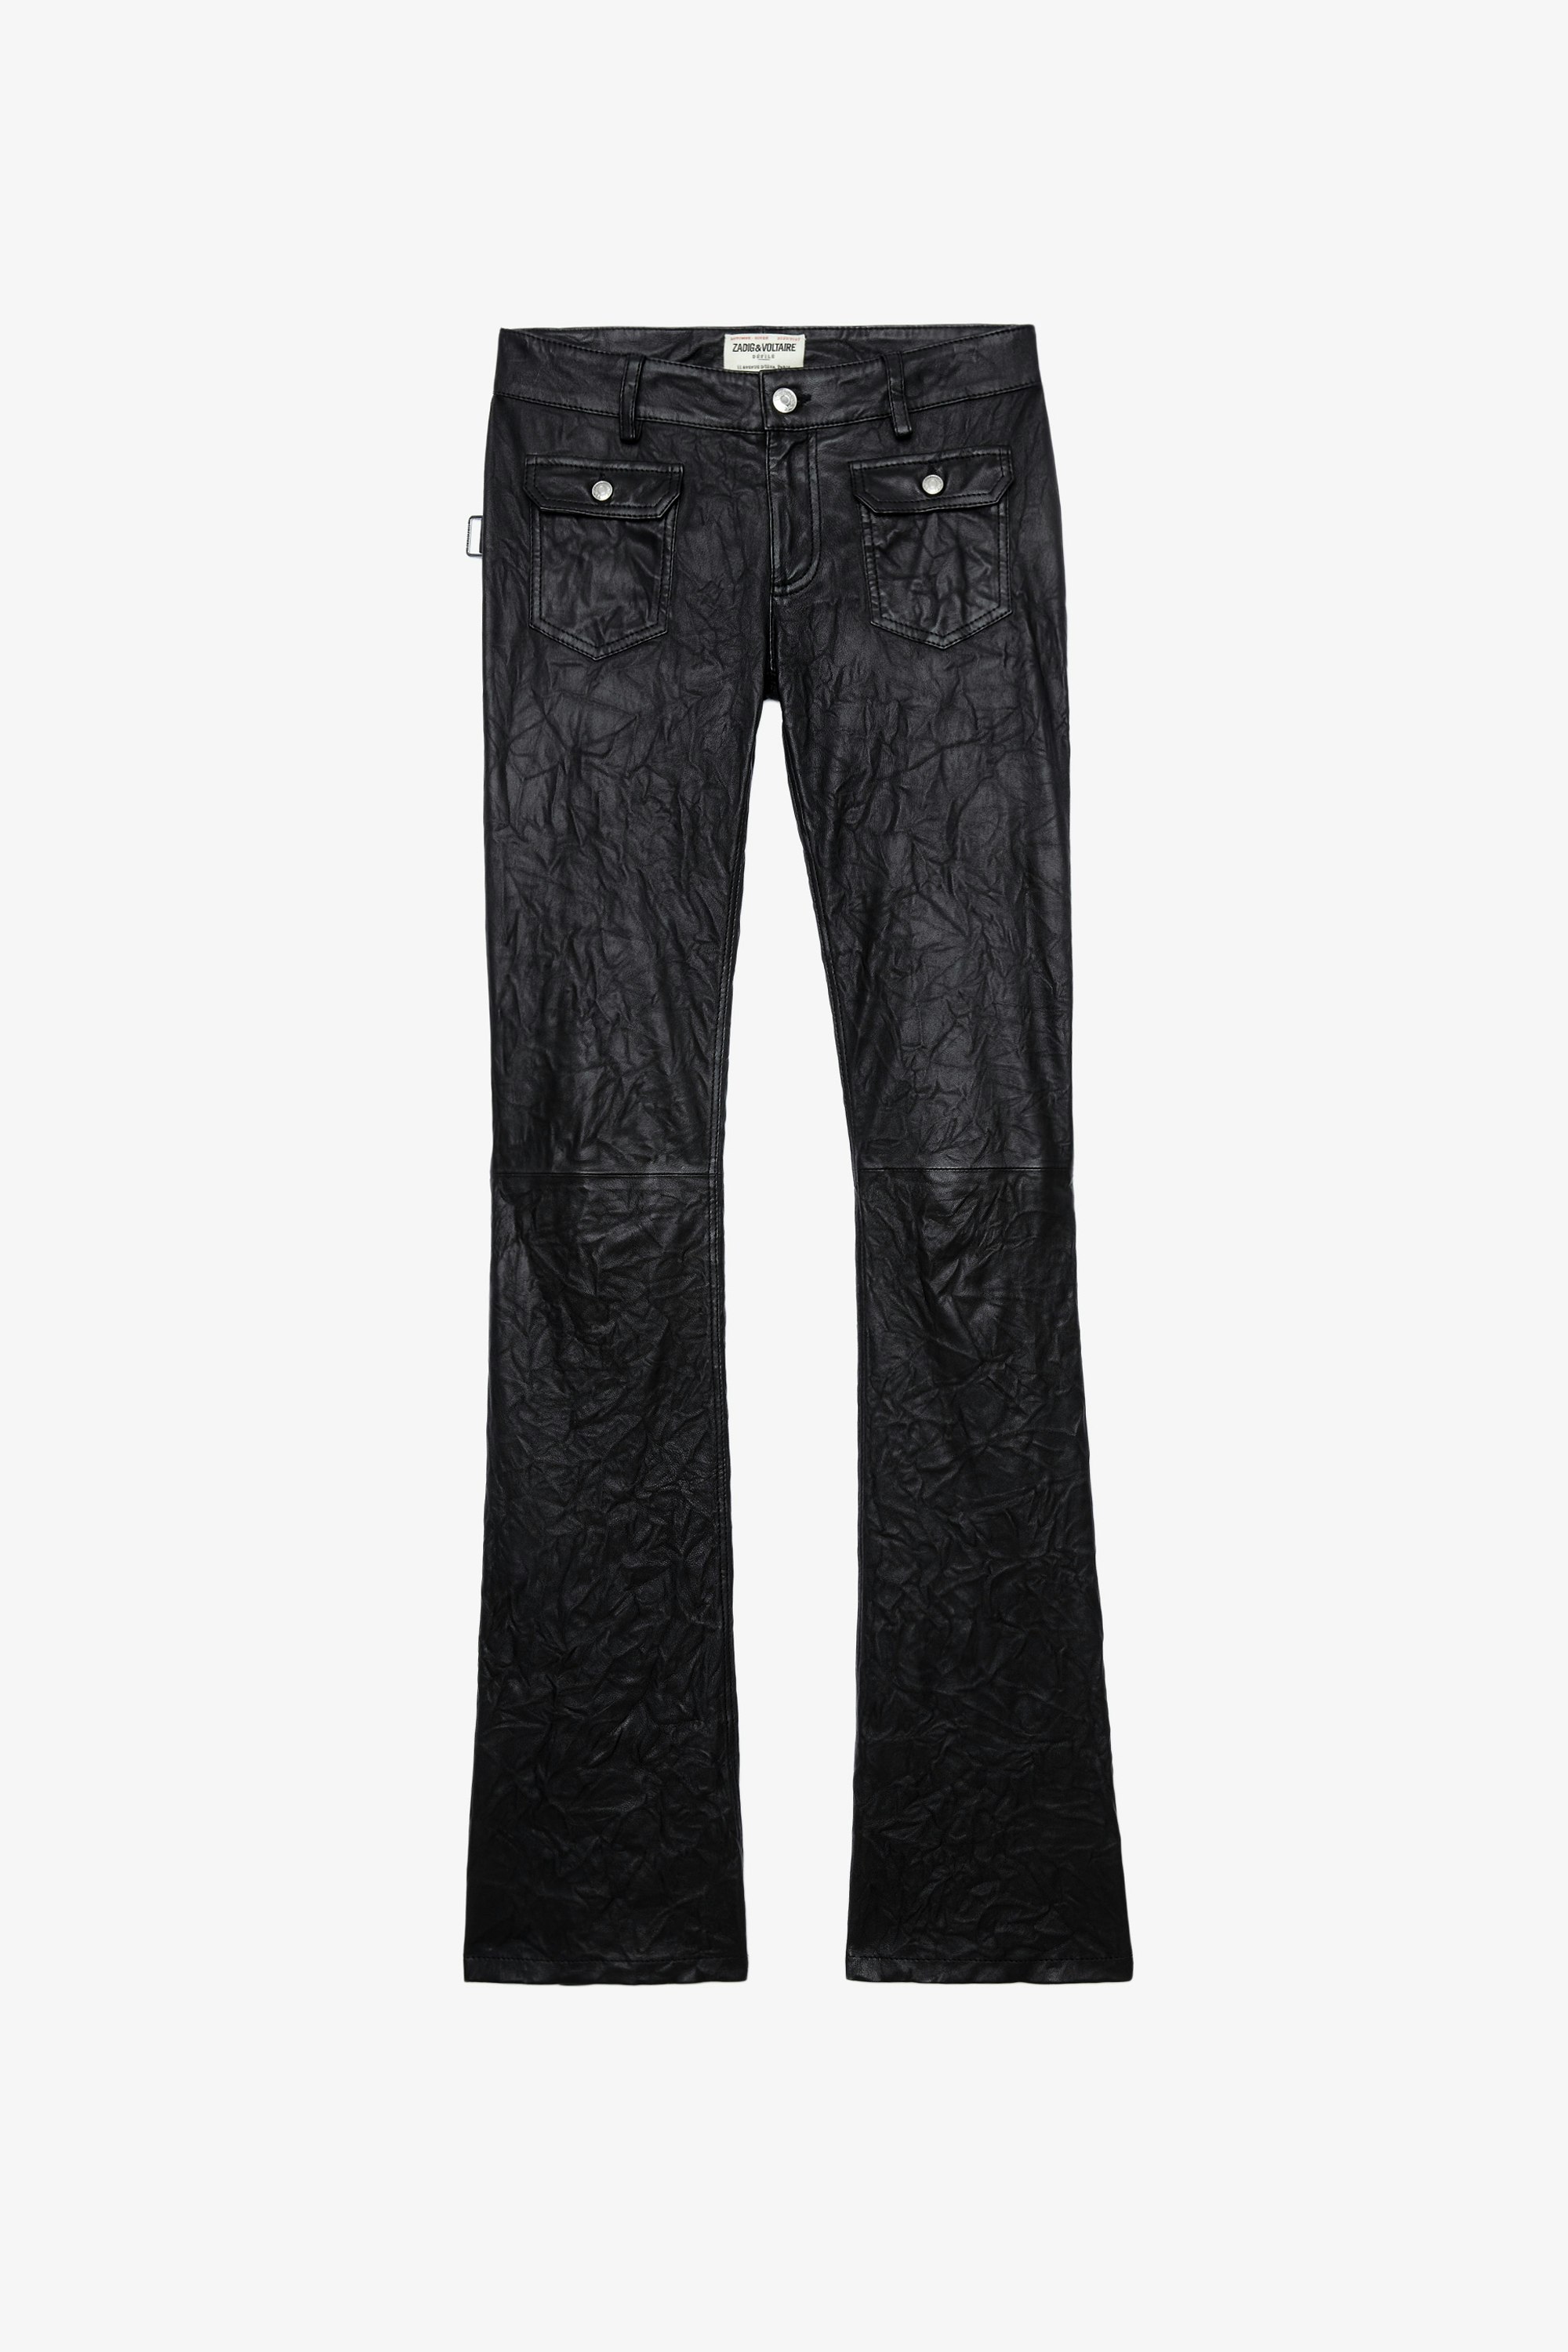 Hippie Creased Leather Trousers - Women's black creased leather trousers